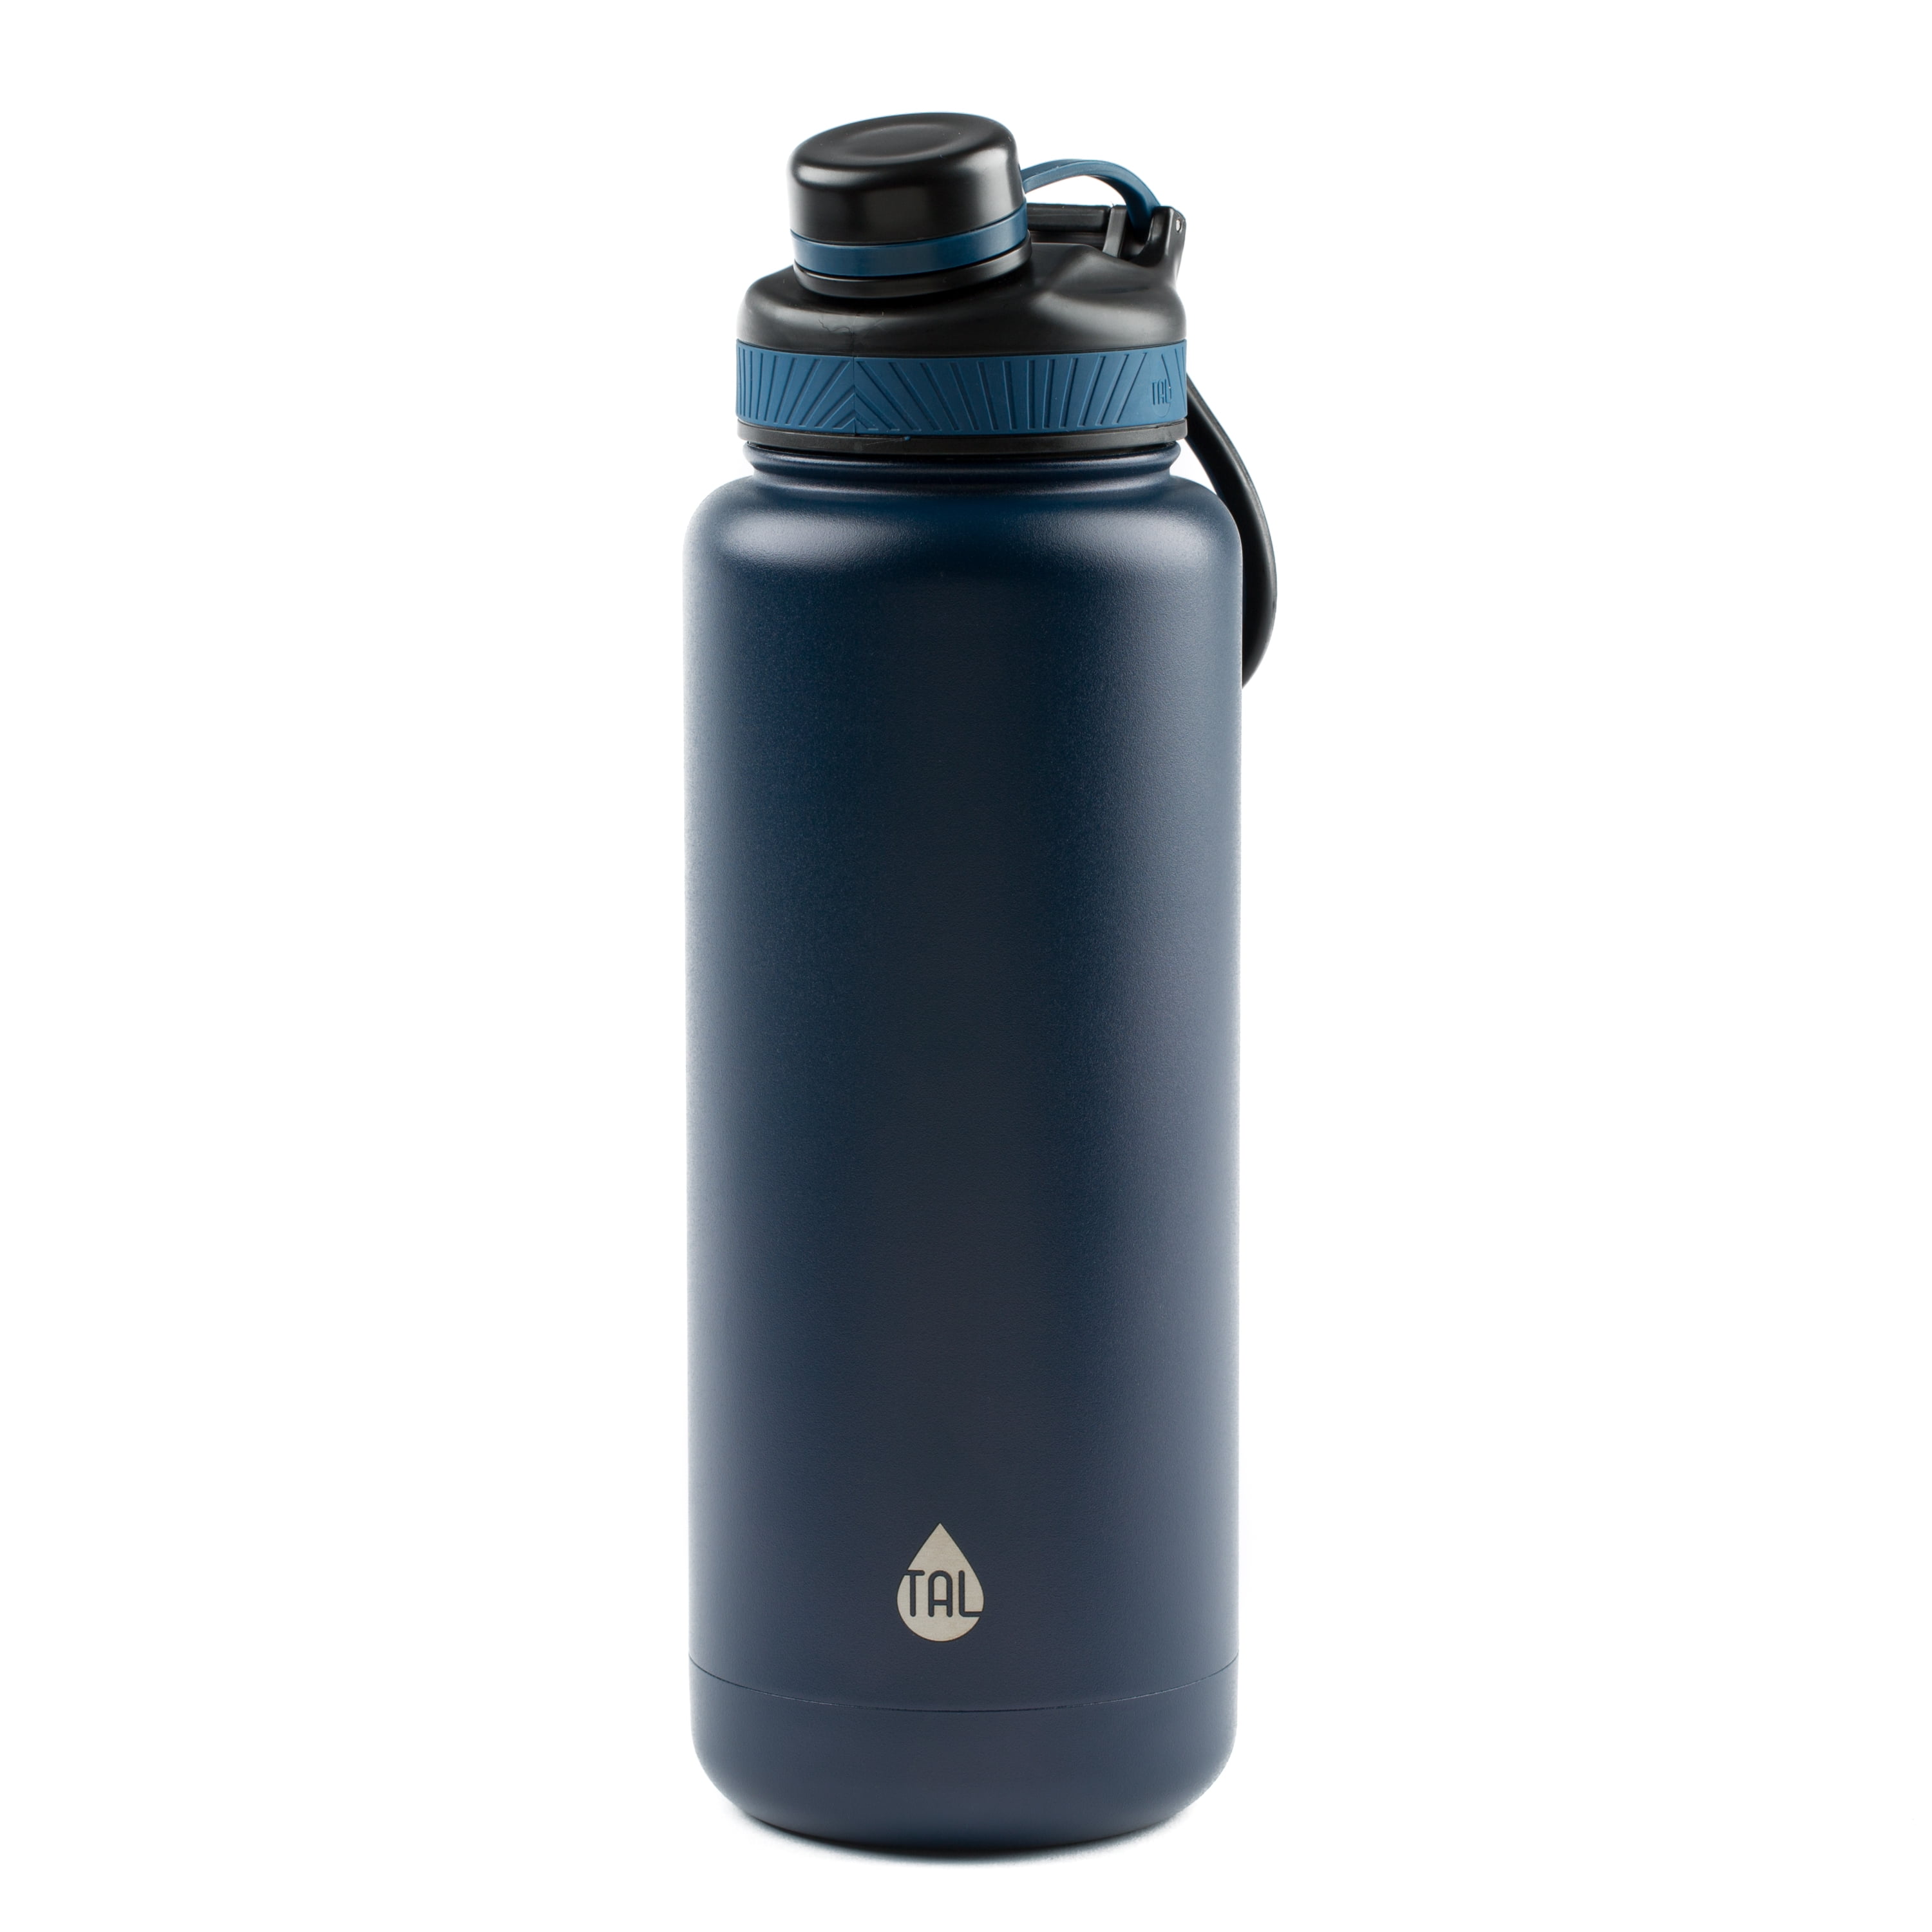 Details about   Lixada 480ml Titanium Double Wall Insuated Water Bottle Leakproof Press E1X7 